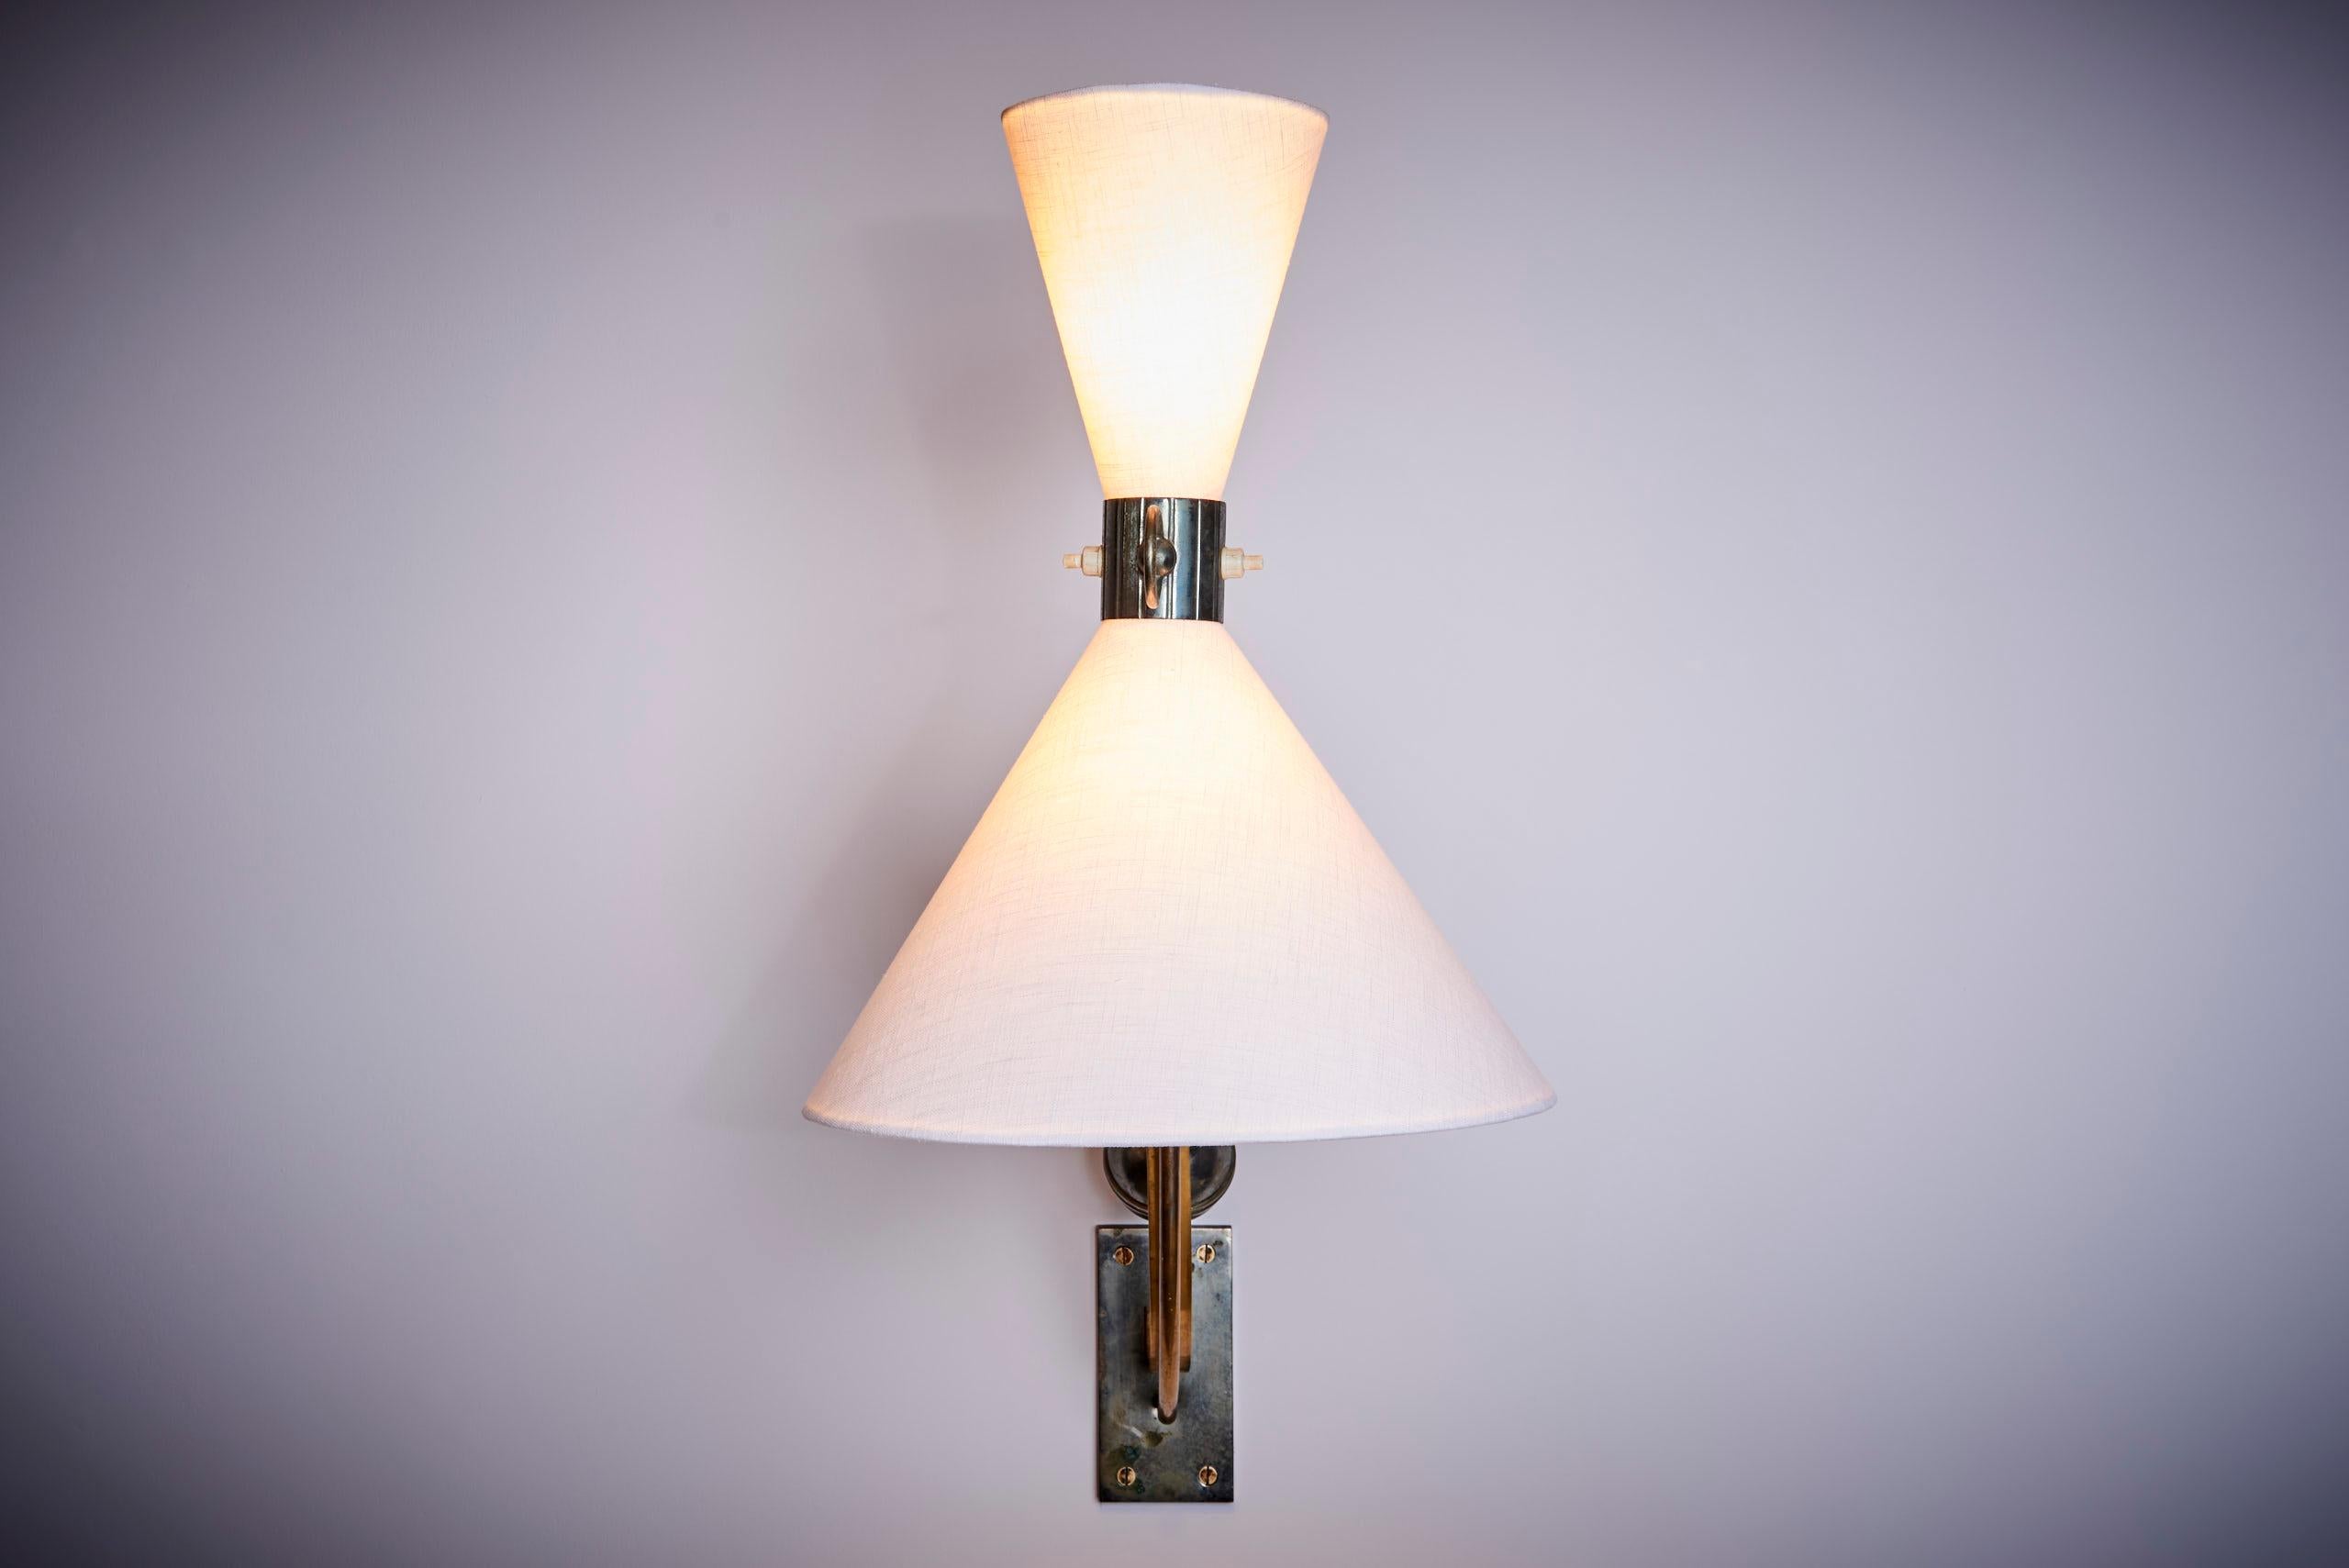 Counterweight Wall Lamp with adjustable height, 1950s - France For Sale 1